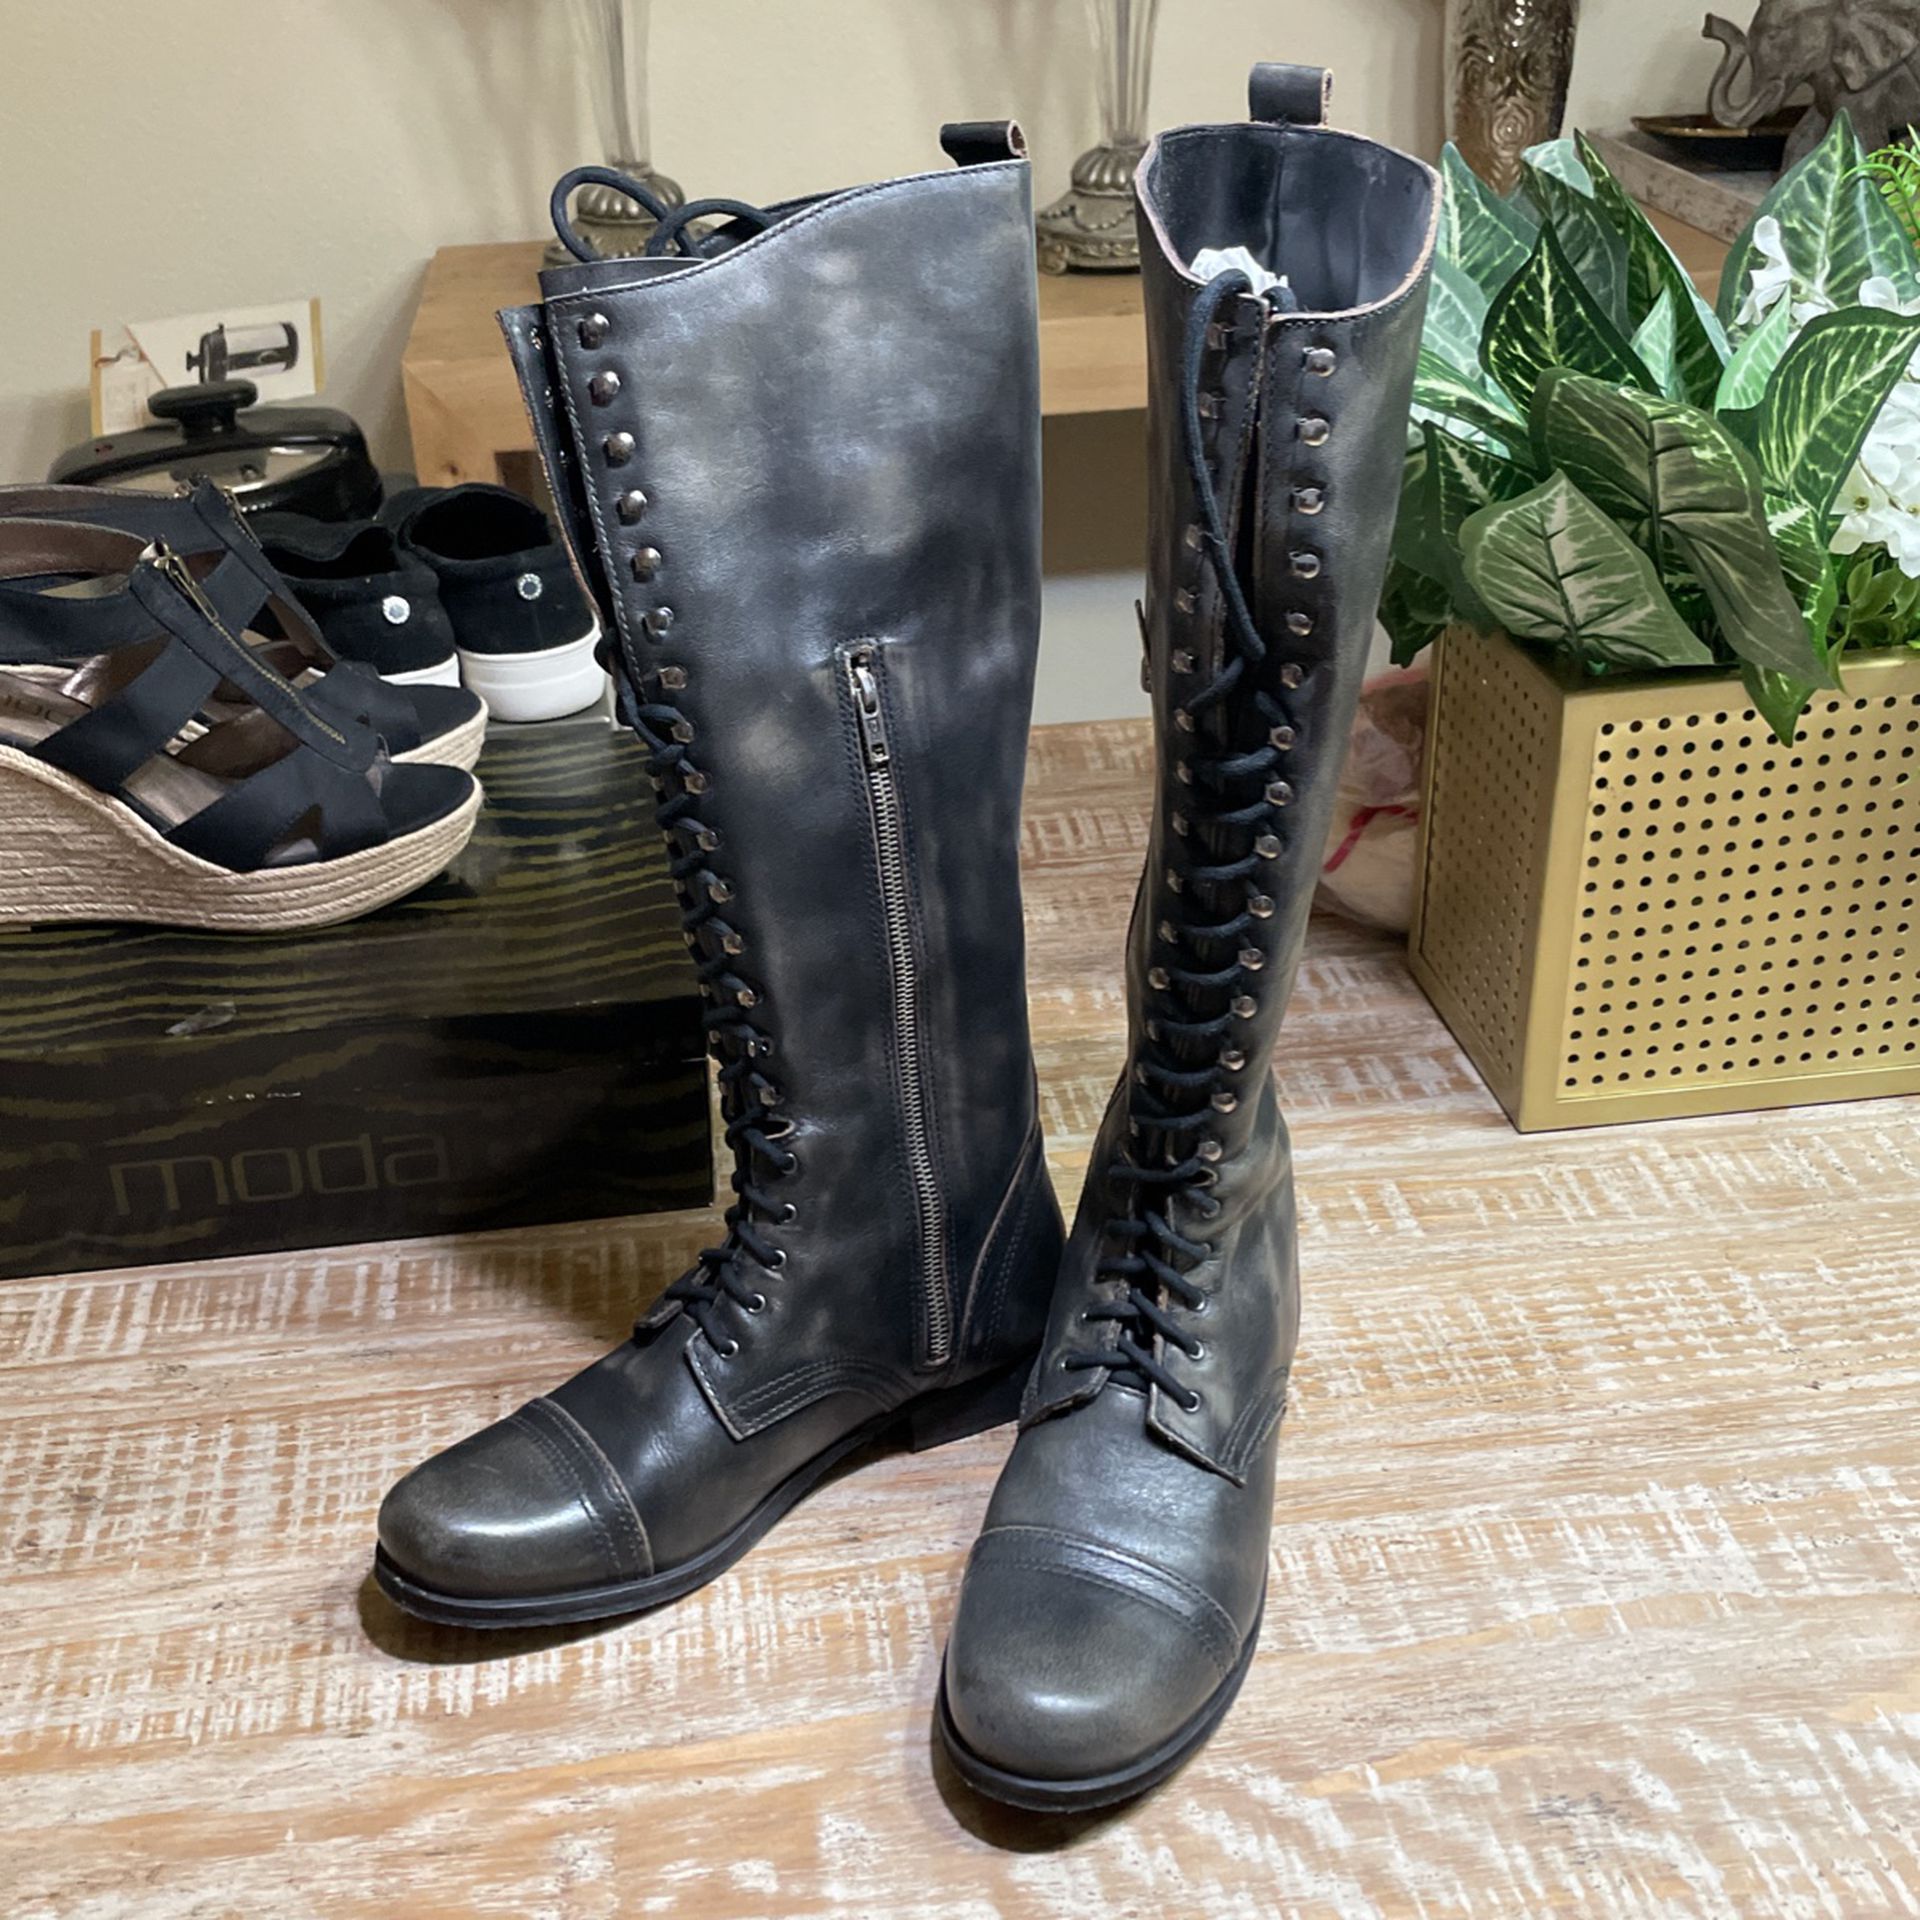 Steve Madden Lace Up Leather Boots 8m for Sale in San Antonio, TX - OfferUp